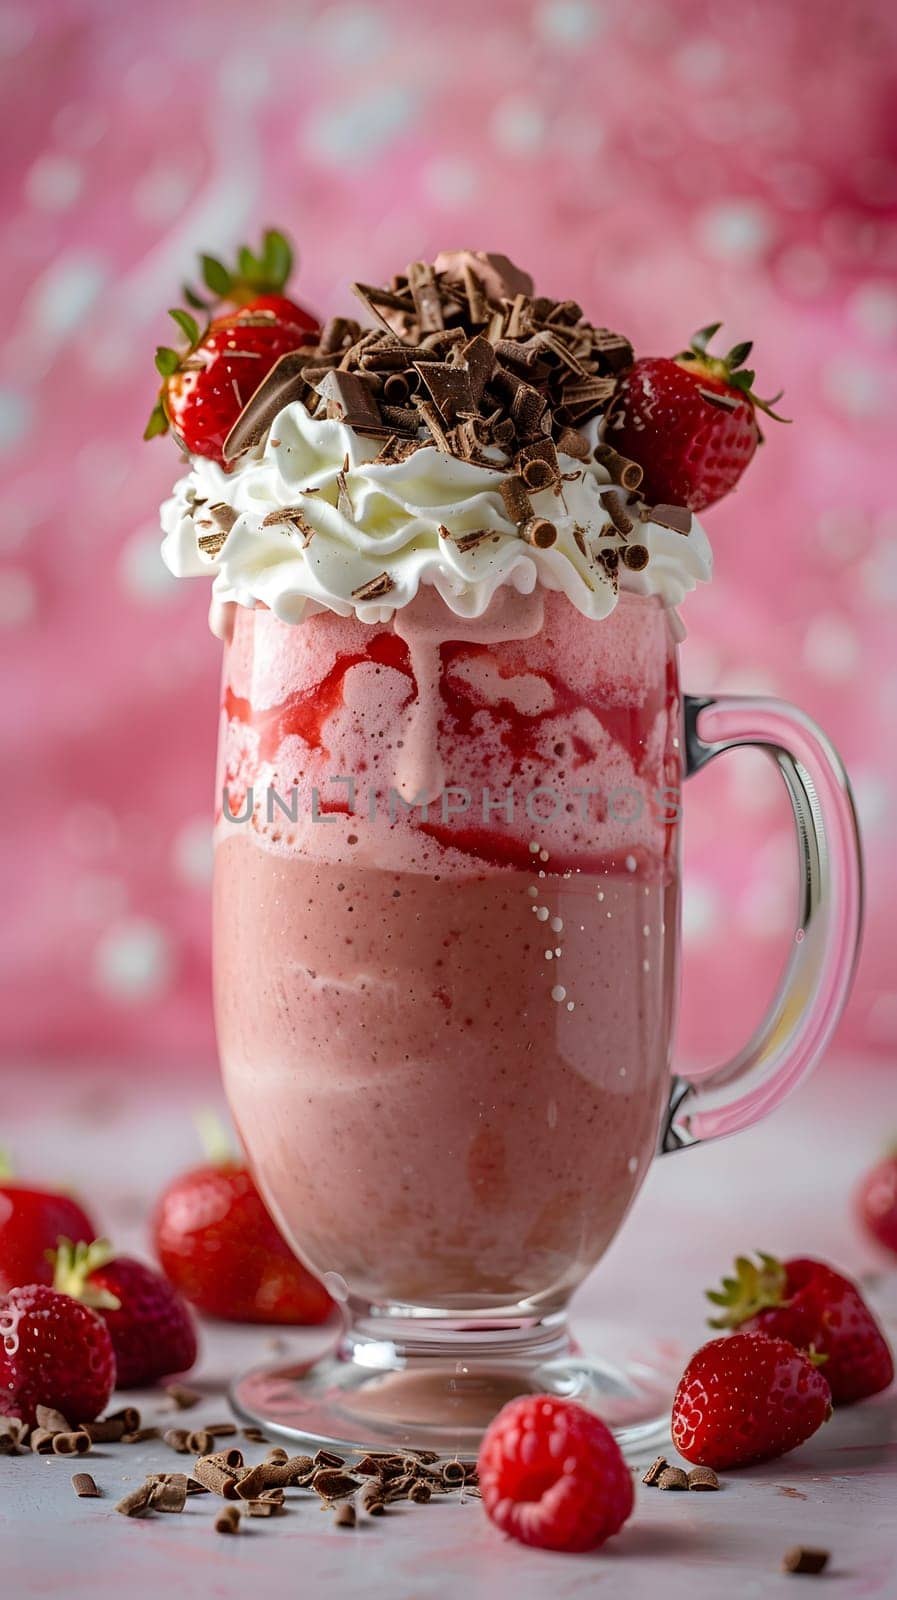 A decadent strawberry milkshake topped with fluffy whipped cream and chocolate shavings, served in a glass on a tableware set with a fresh flower as decoration